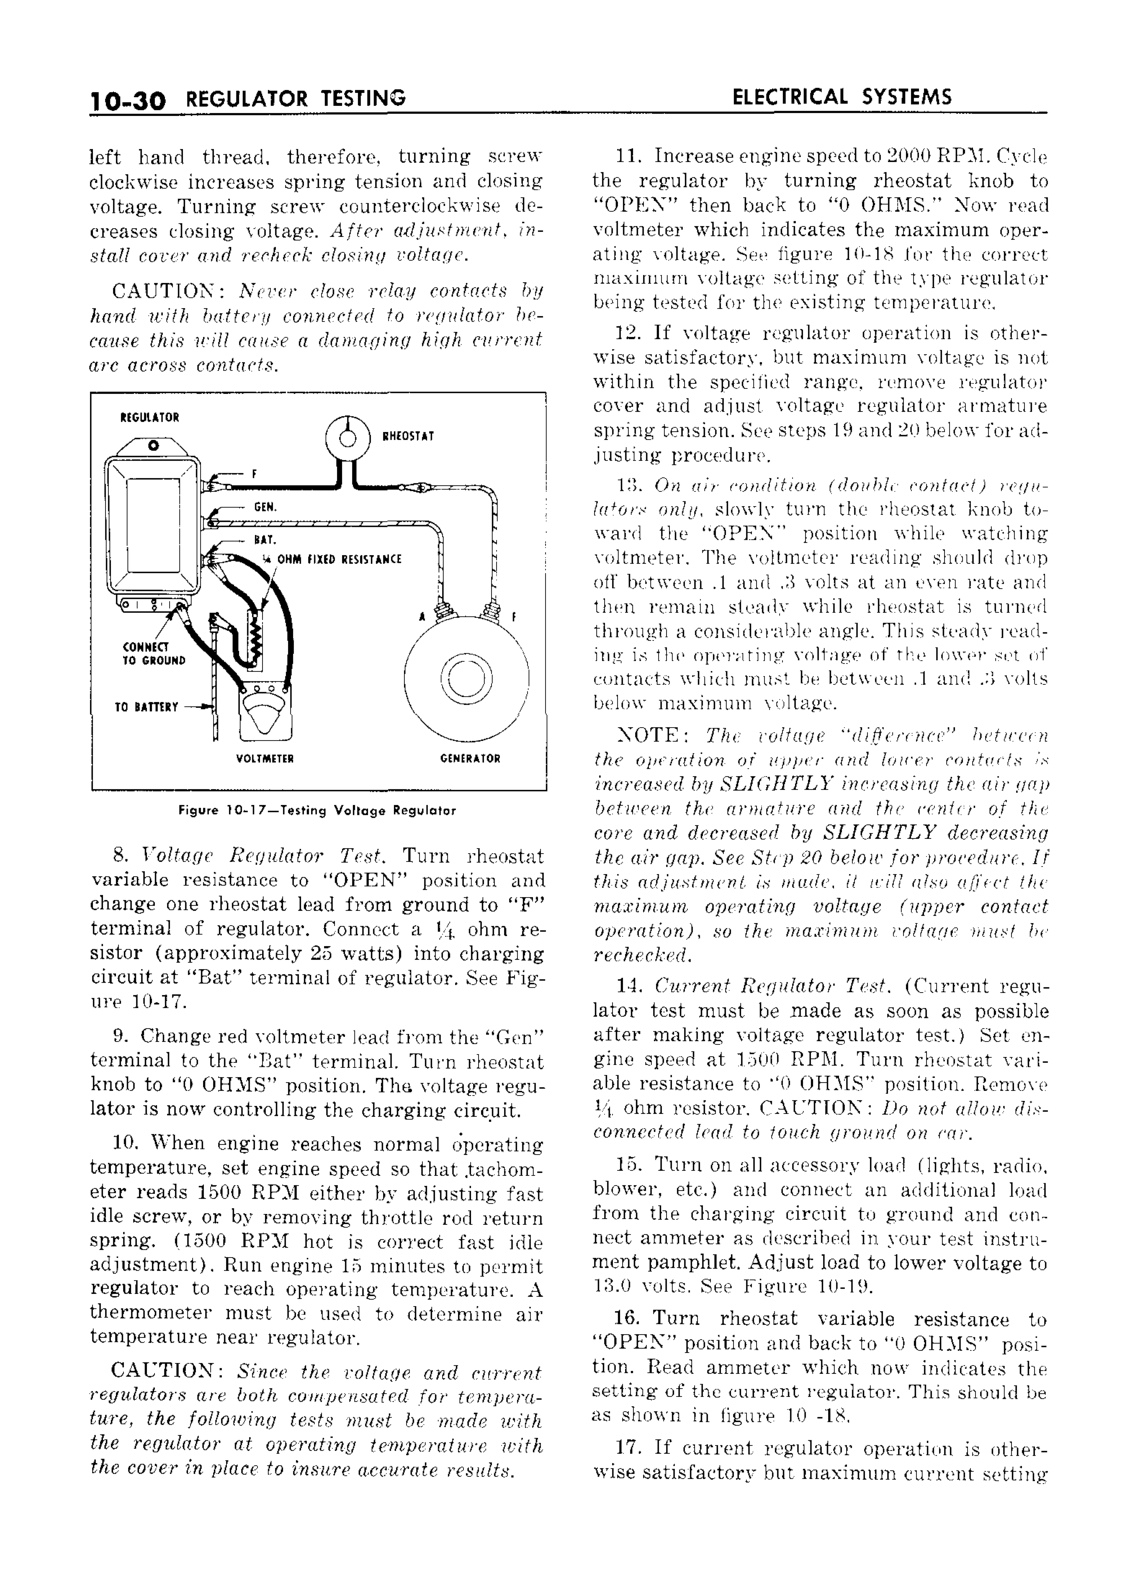 n_11 1959 Buick Shop Manual - Electrical Systems-030-030.jpg